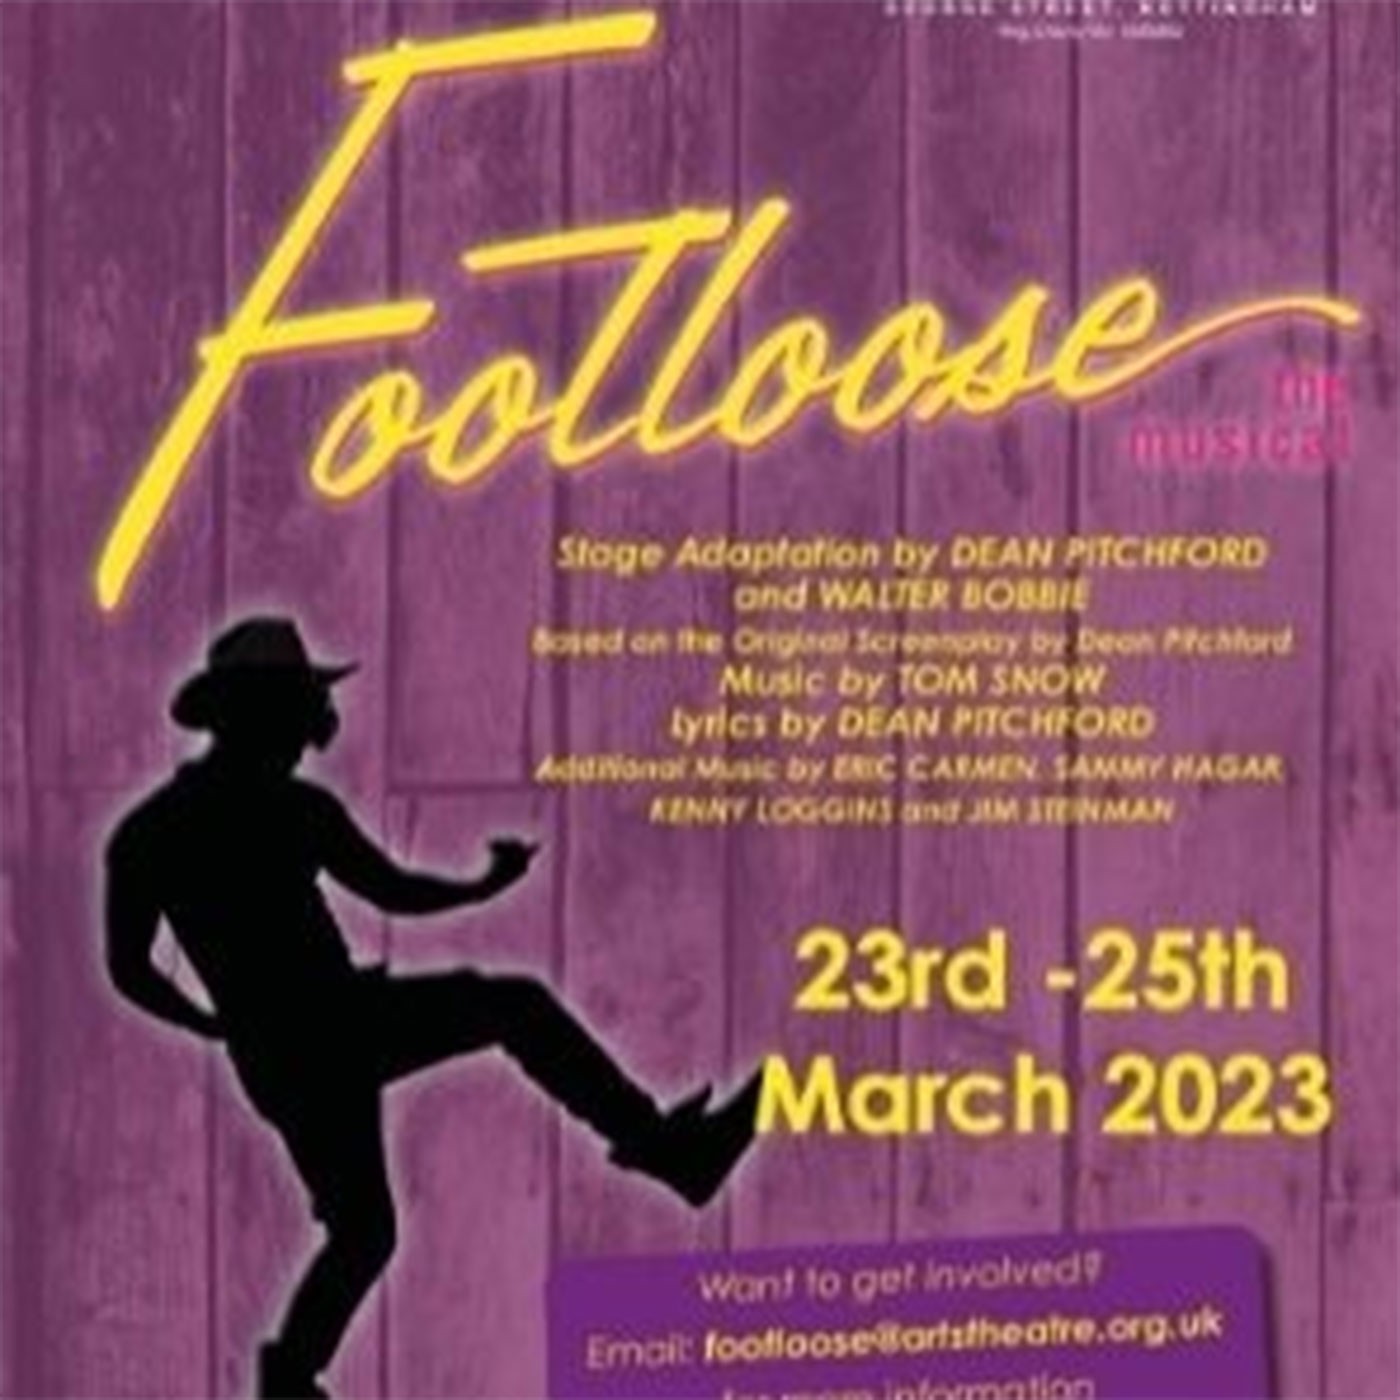 Footloose the Musical